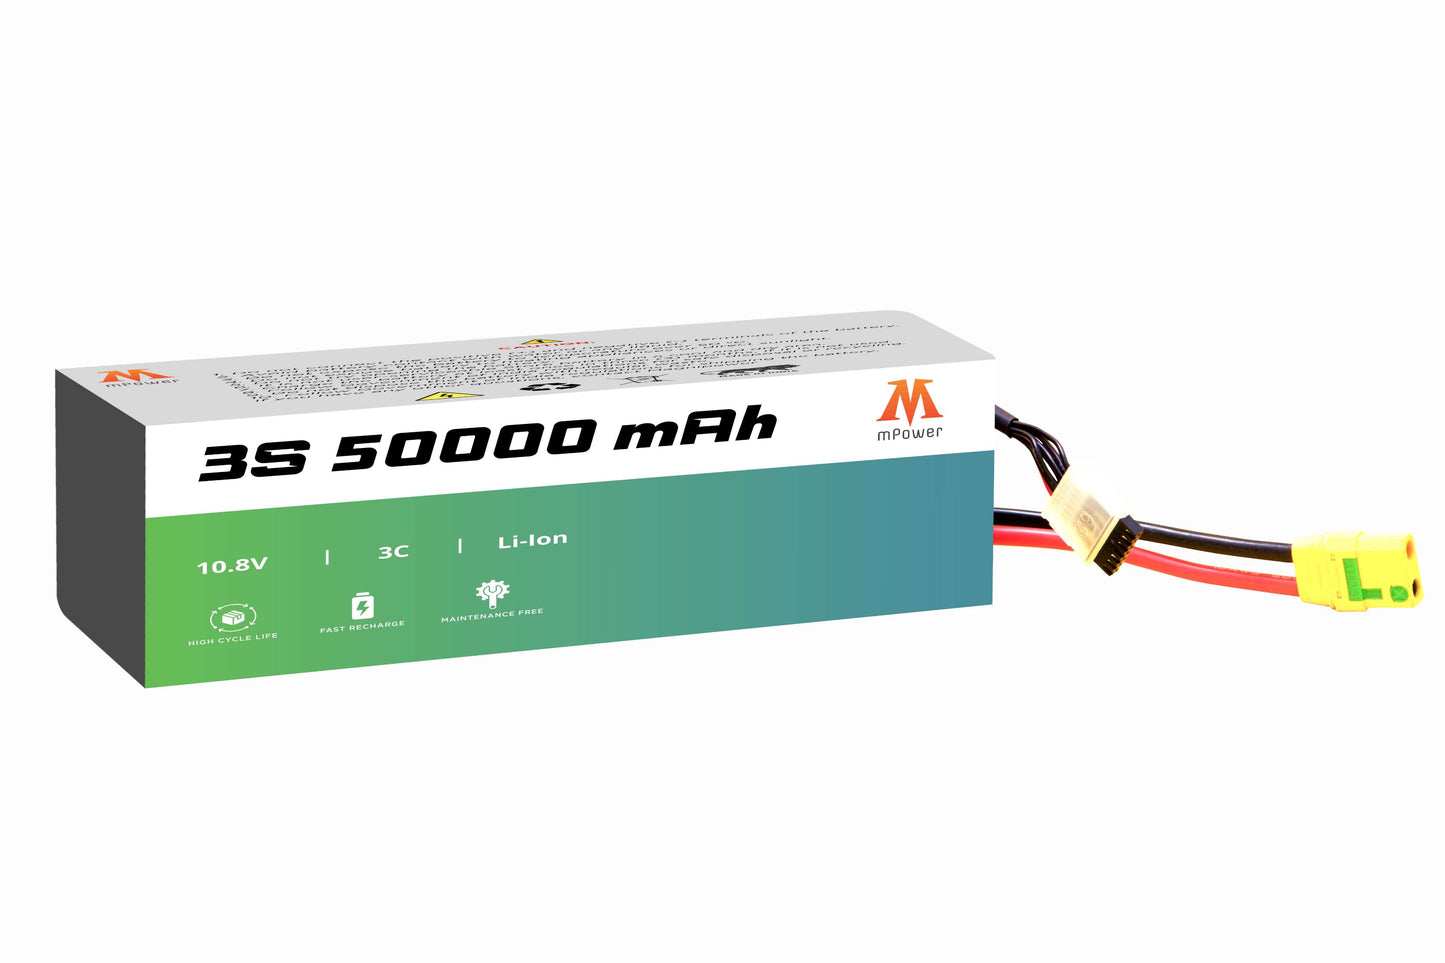 mPower 3S 50000mAh Lithium-Ion Battery for Survey Drones